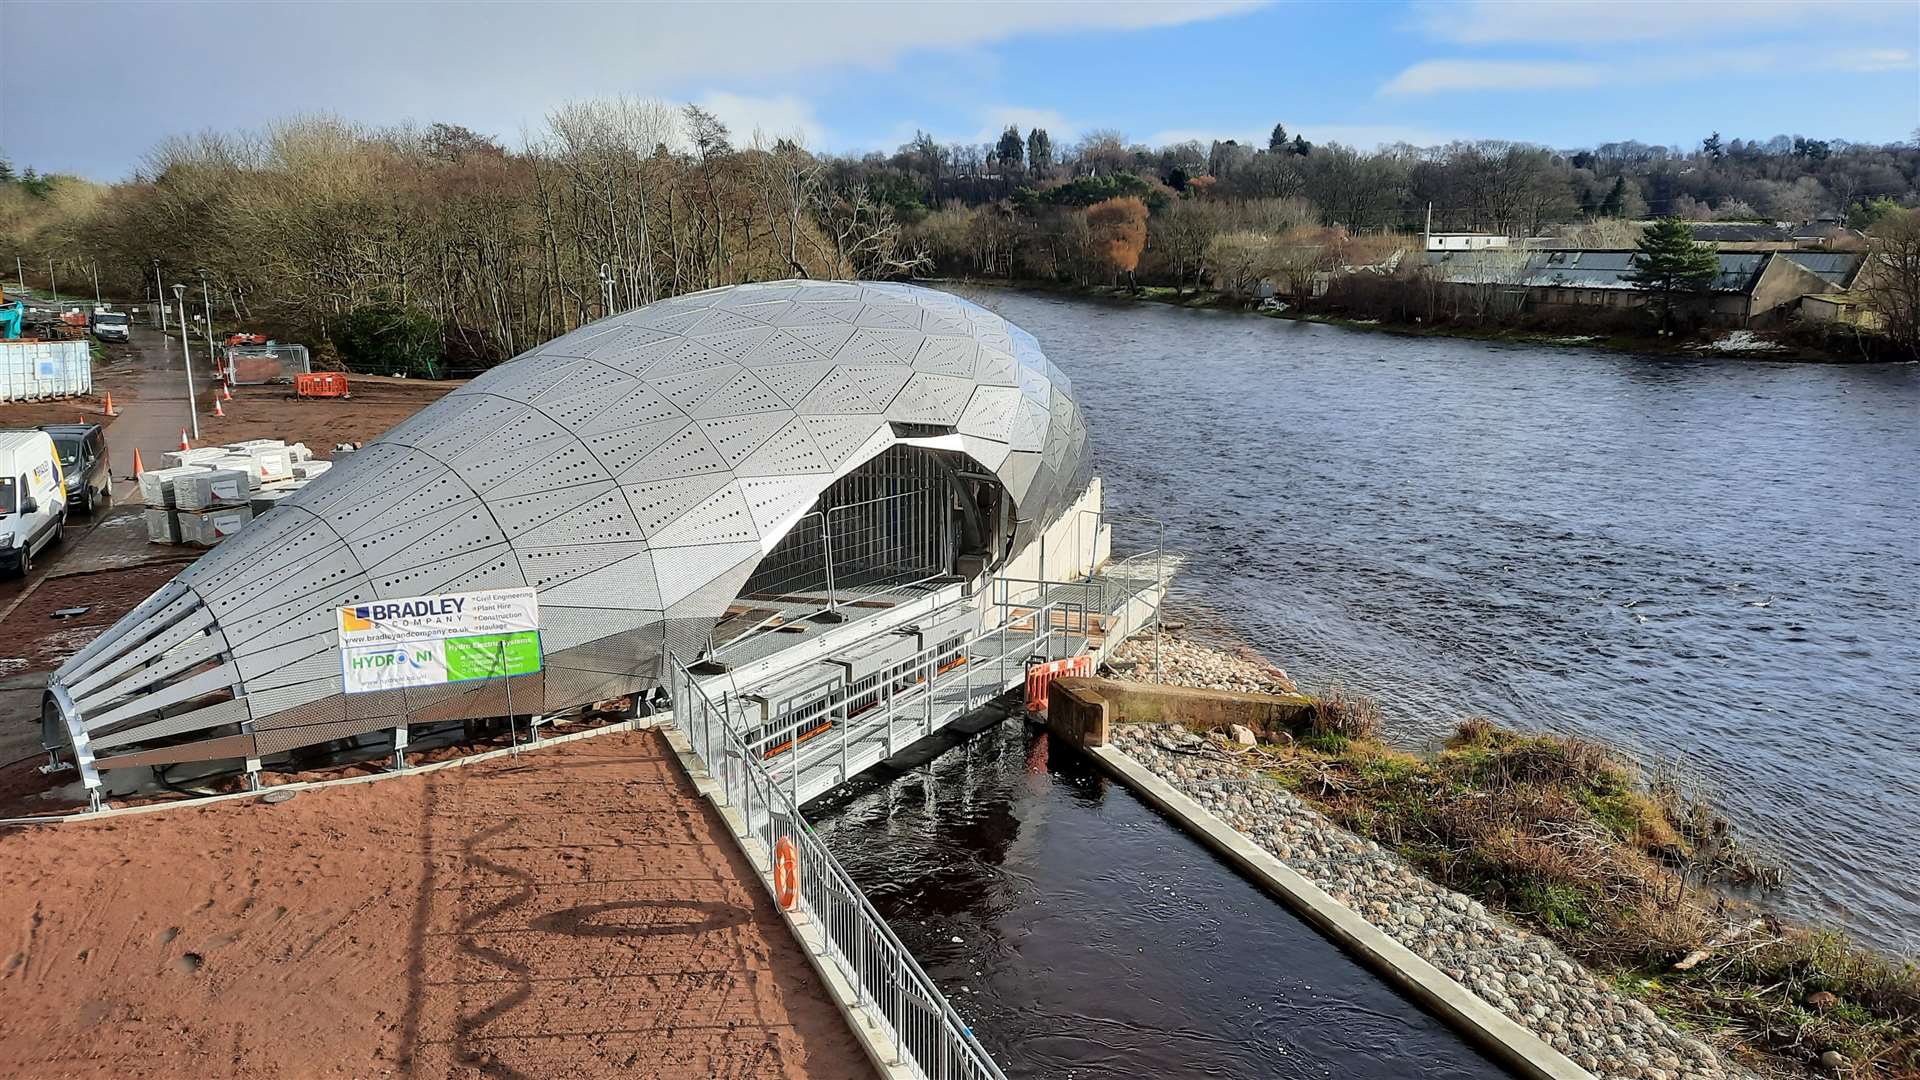 The new Hydro Ness project under construction beside the River Ness.